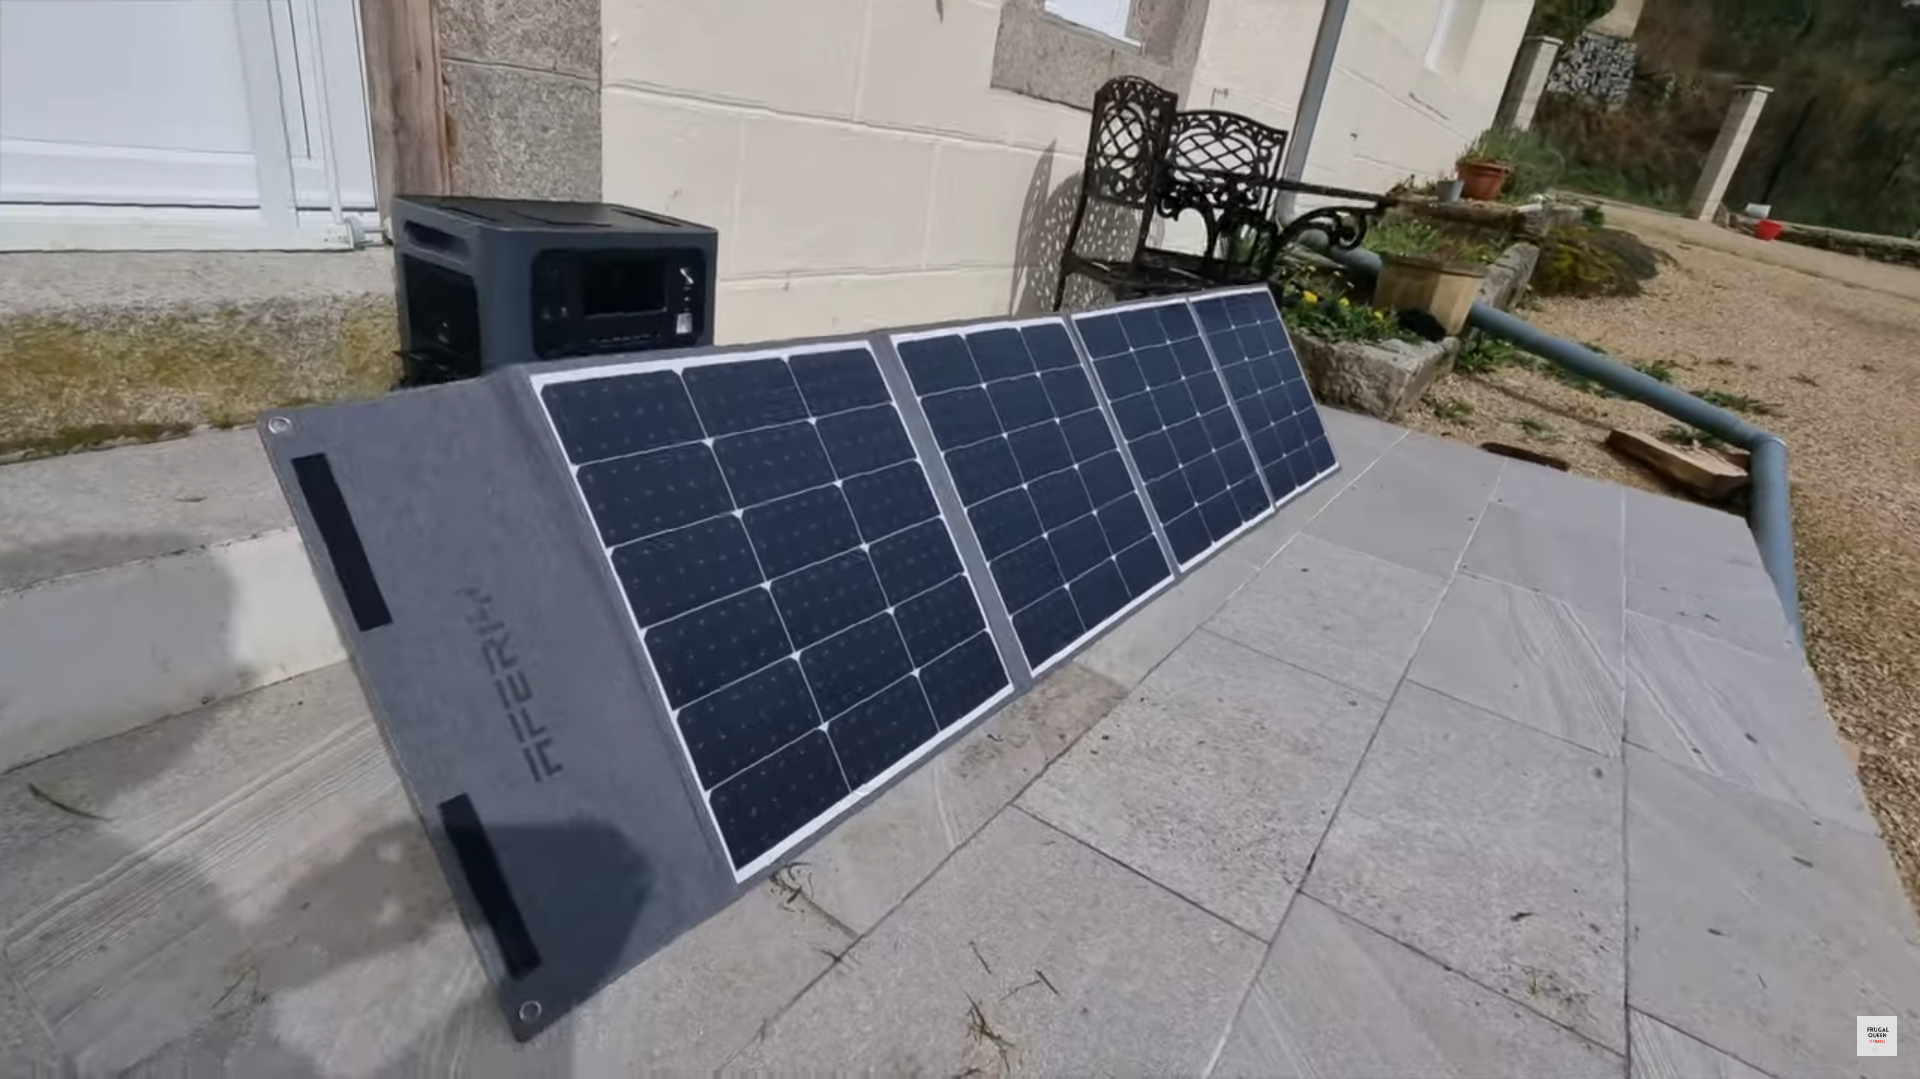 The Solar Panels Are Lightweight And Easy To Move